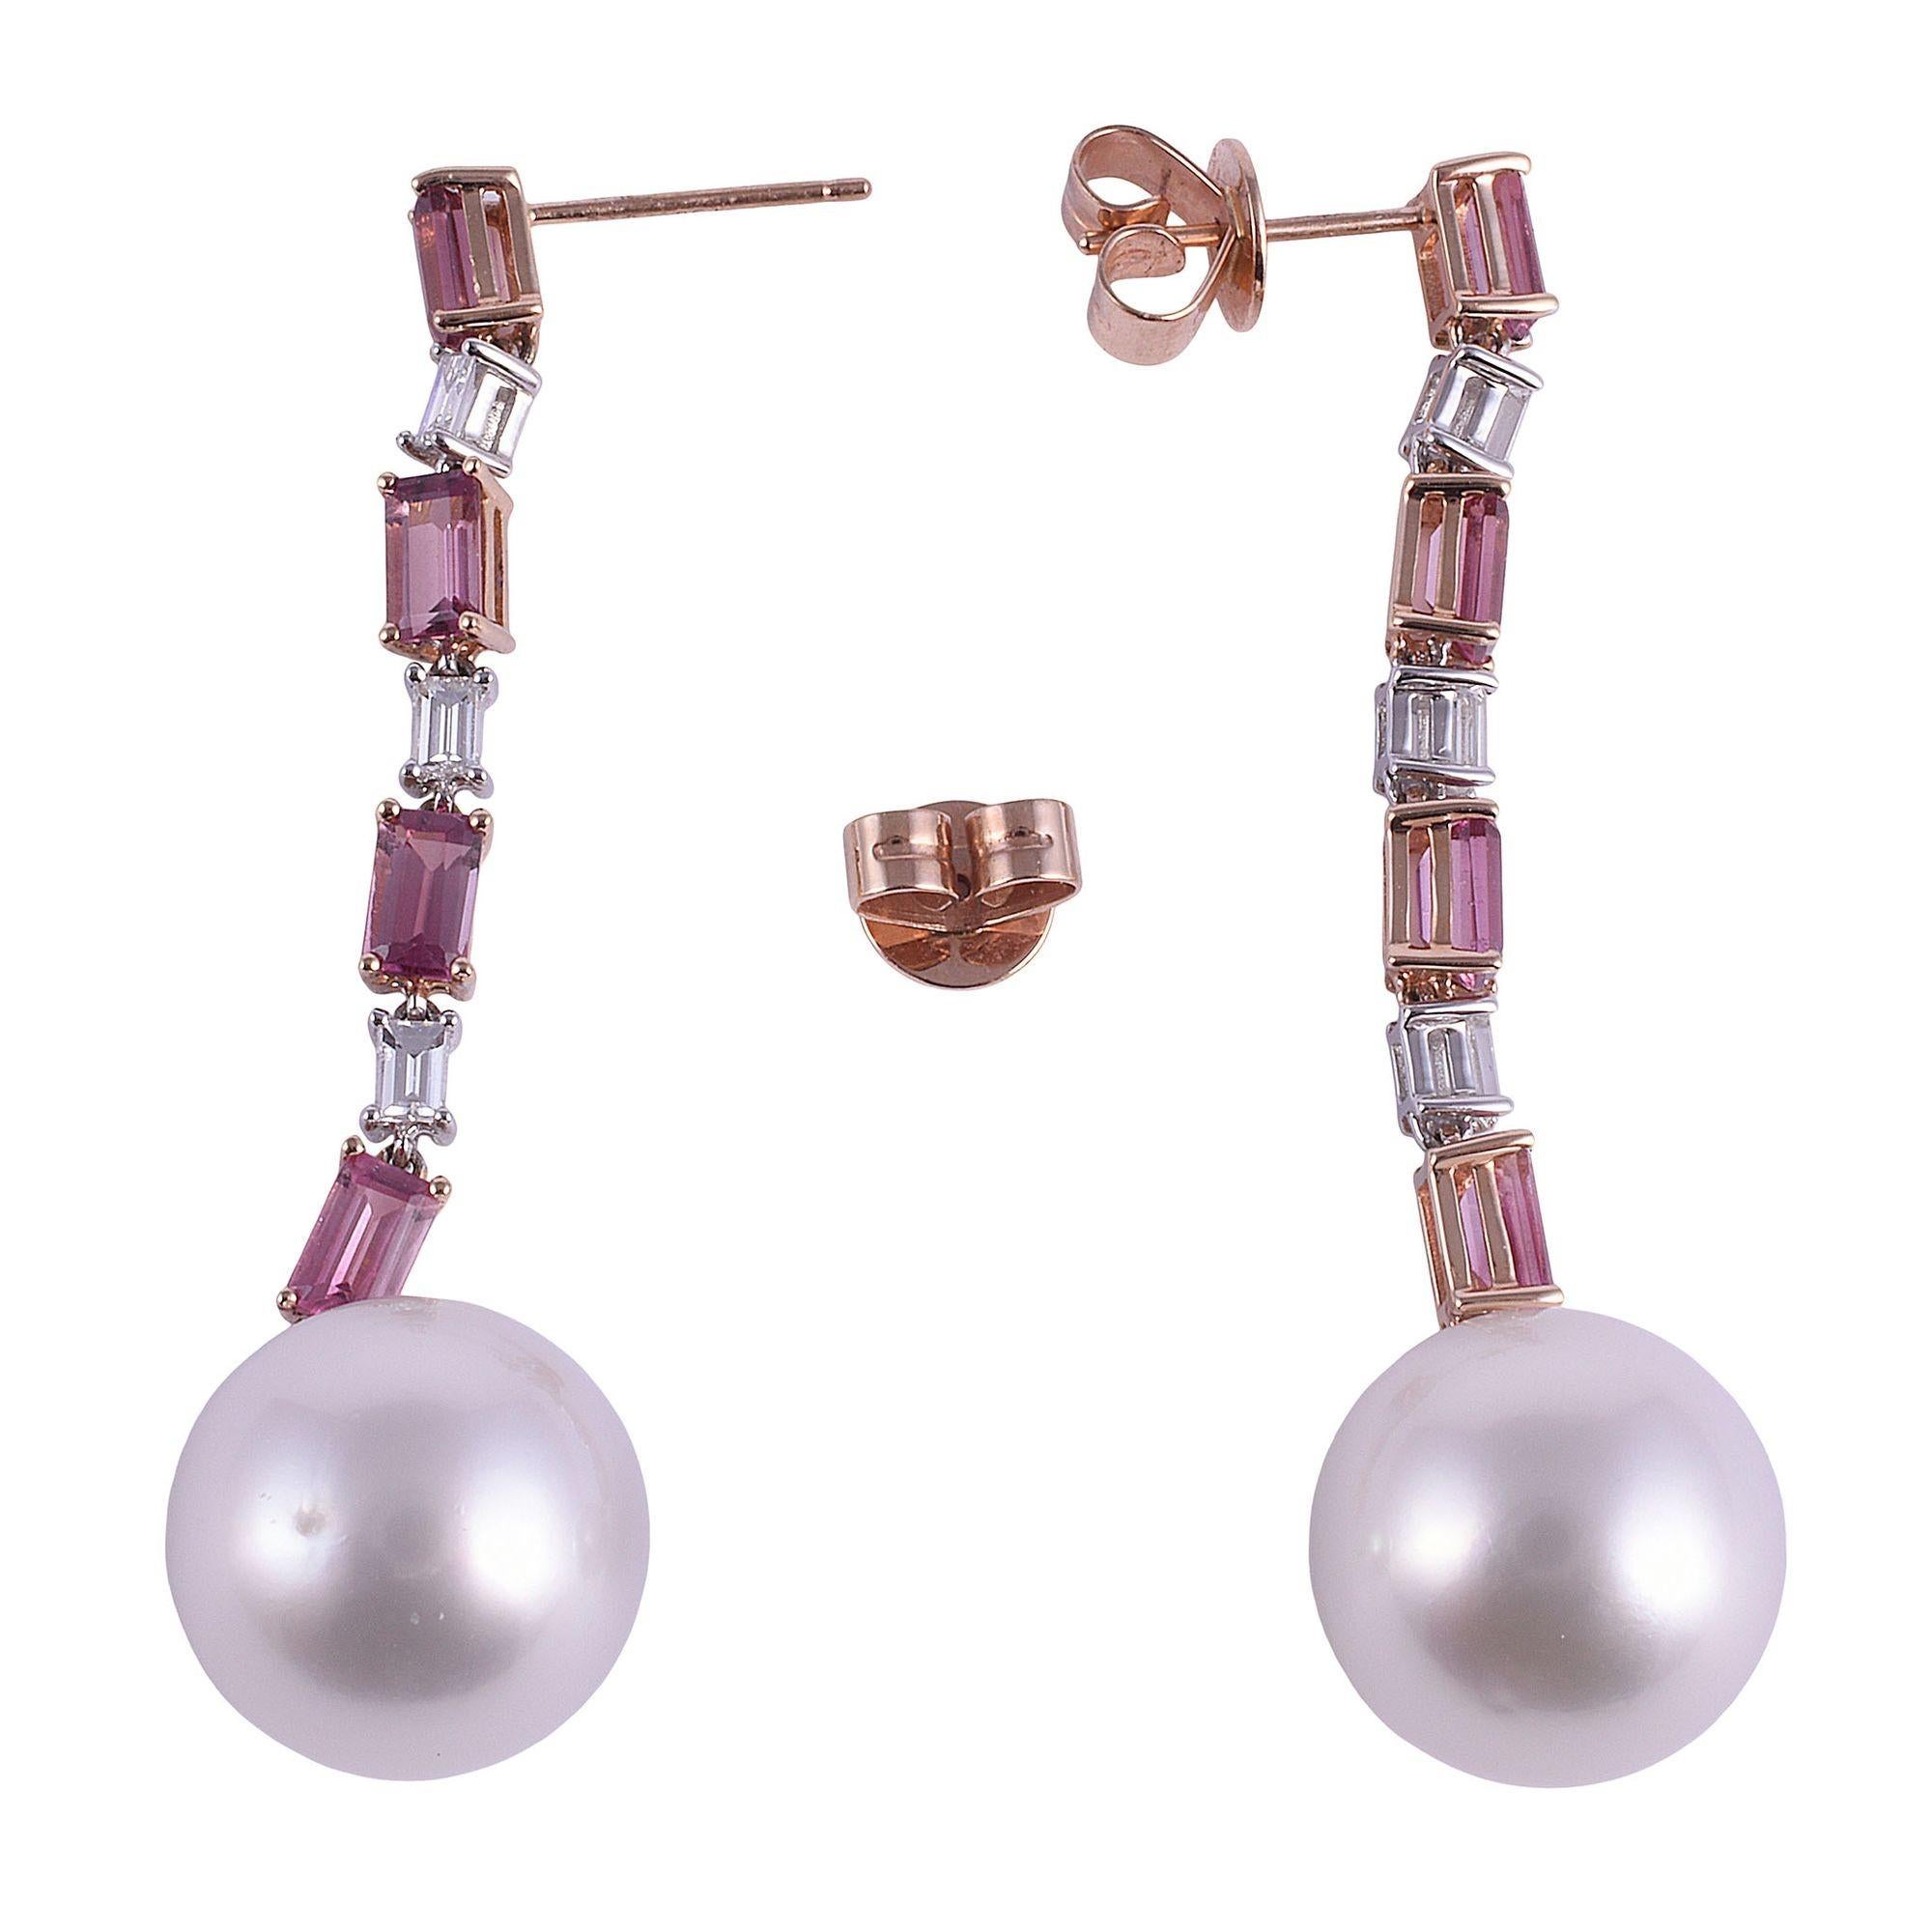 Estate South Sea pearl pink tourmaline 18K rose gold dangle earrings. These estate earrings are crafted in 18 karat rose gold featuring 13.5mm cultured South Sea pearls suspended from a line of alternating pink tourmalines and diamonds. There are